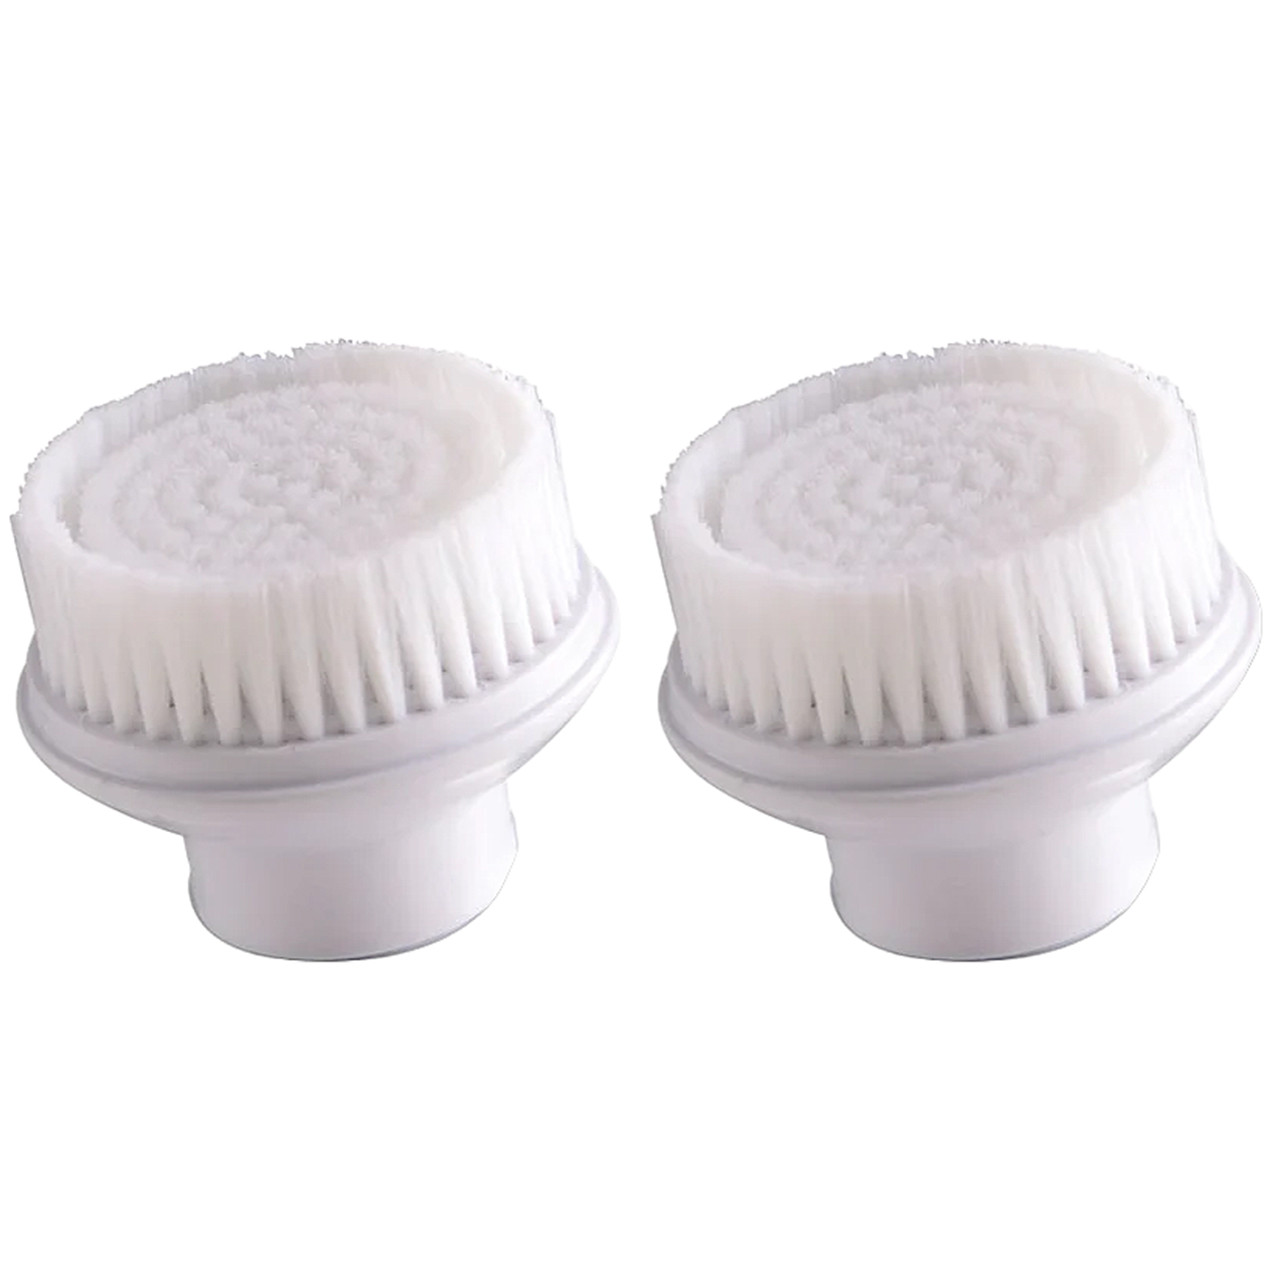 MBK Skincare 2PK Replacement Brush Heads - Soft 